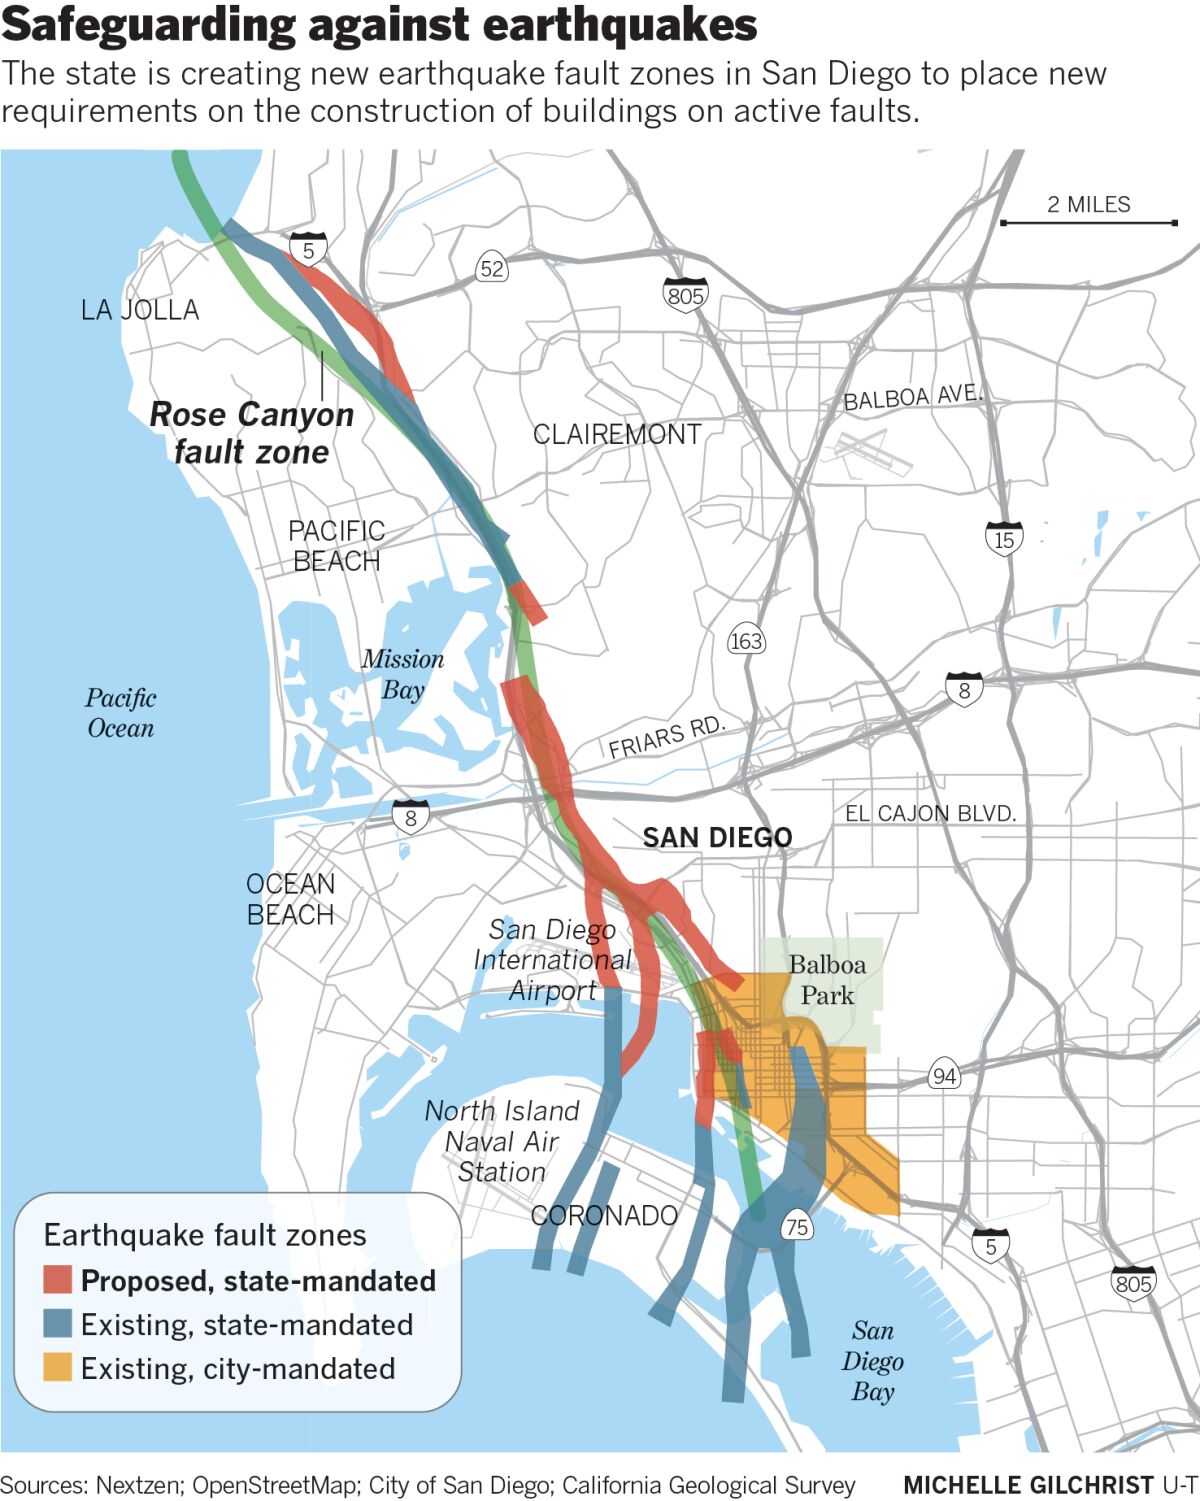 The state is creating new earthquake fault zones in San Diego.